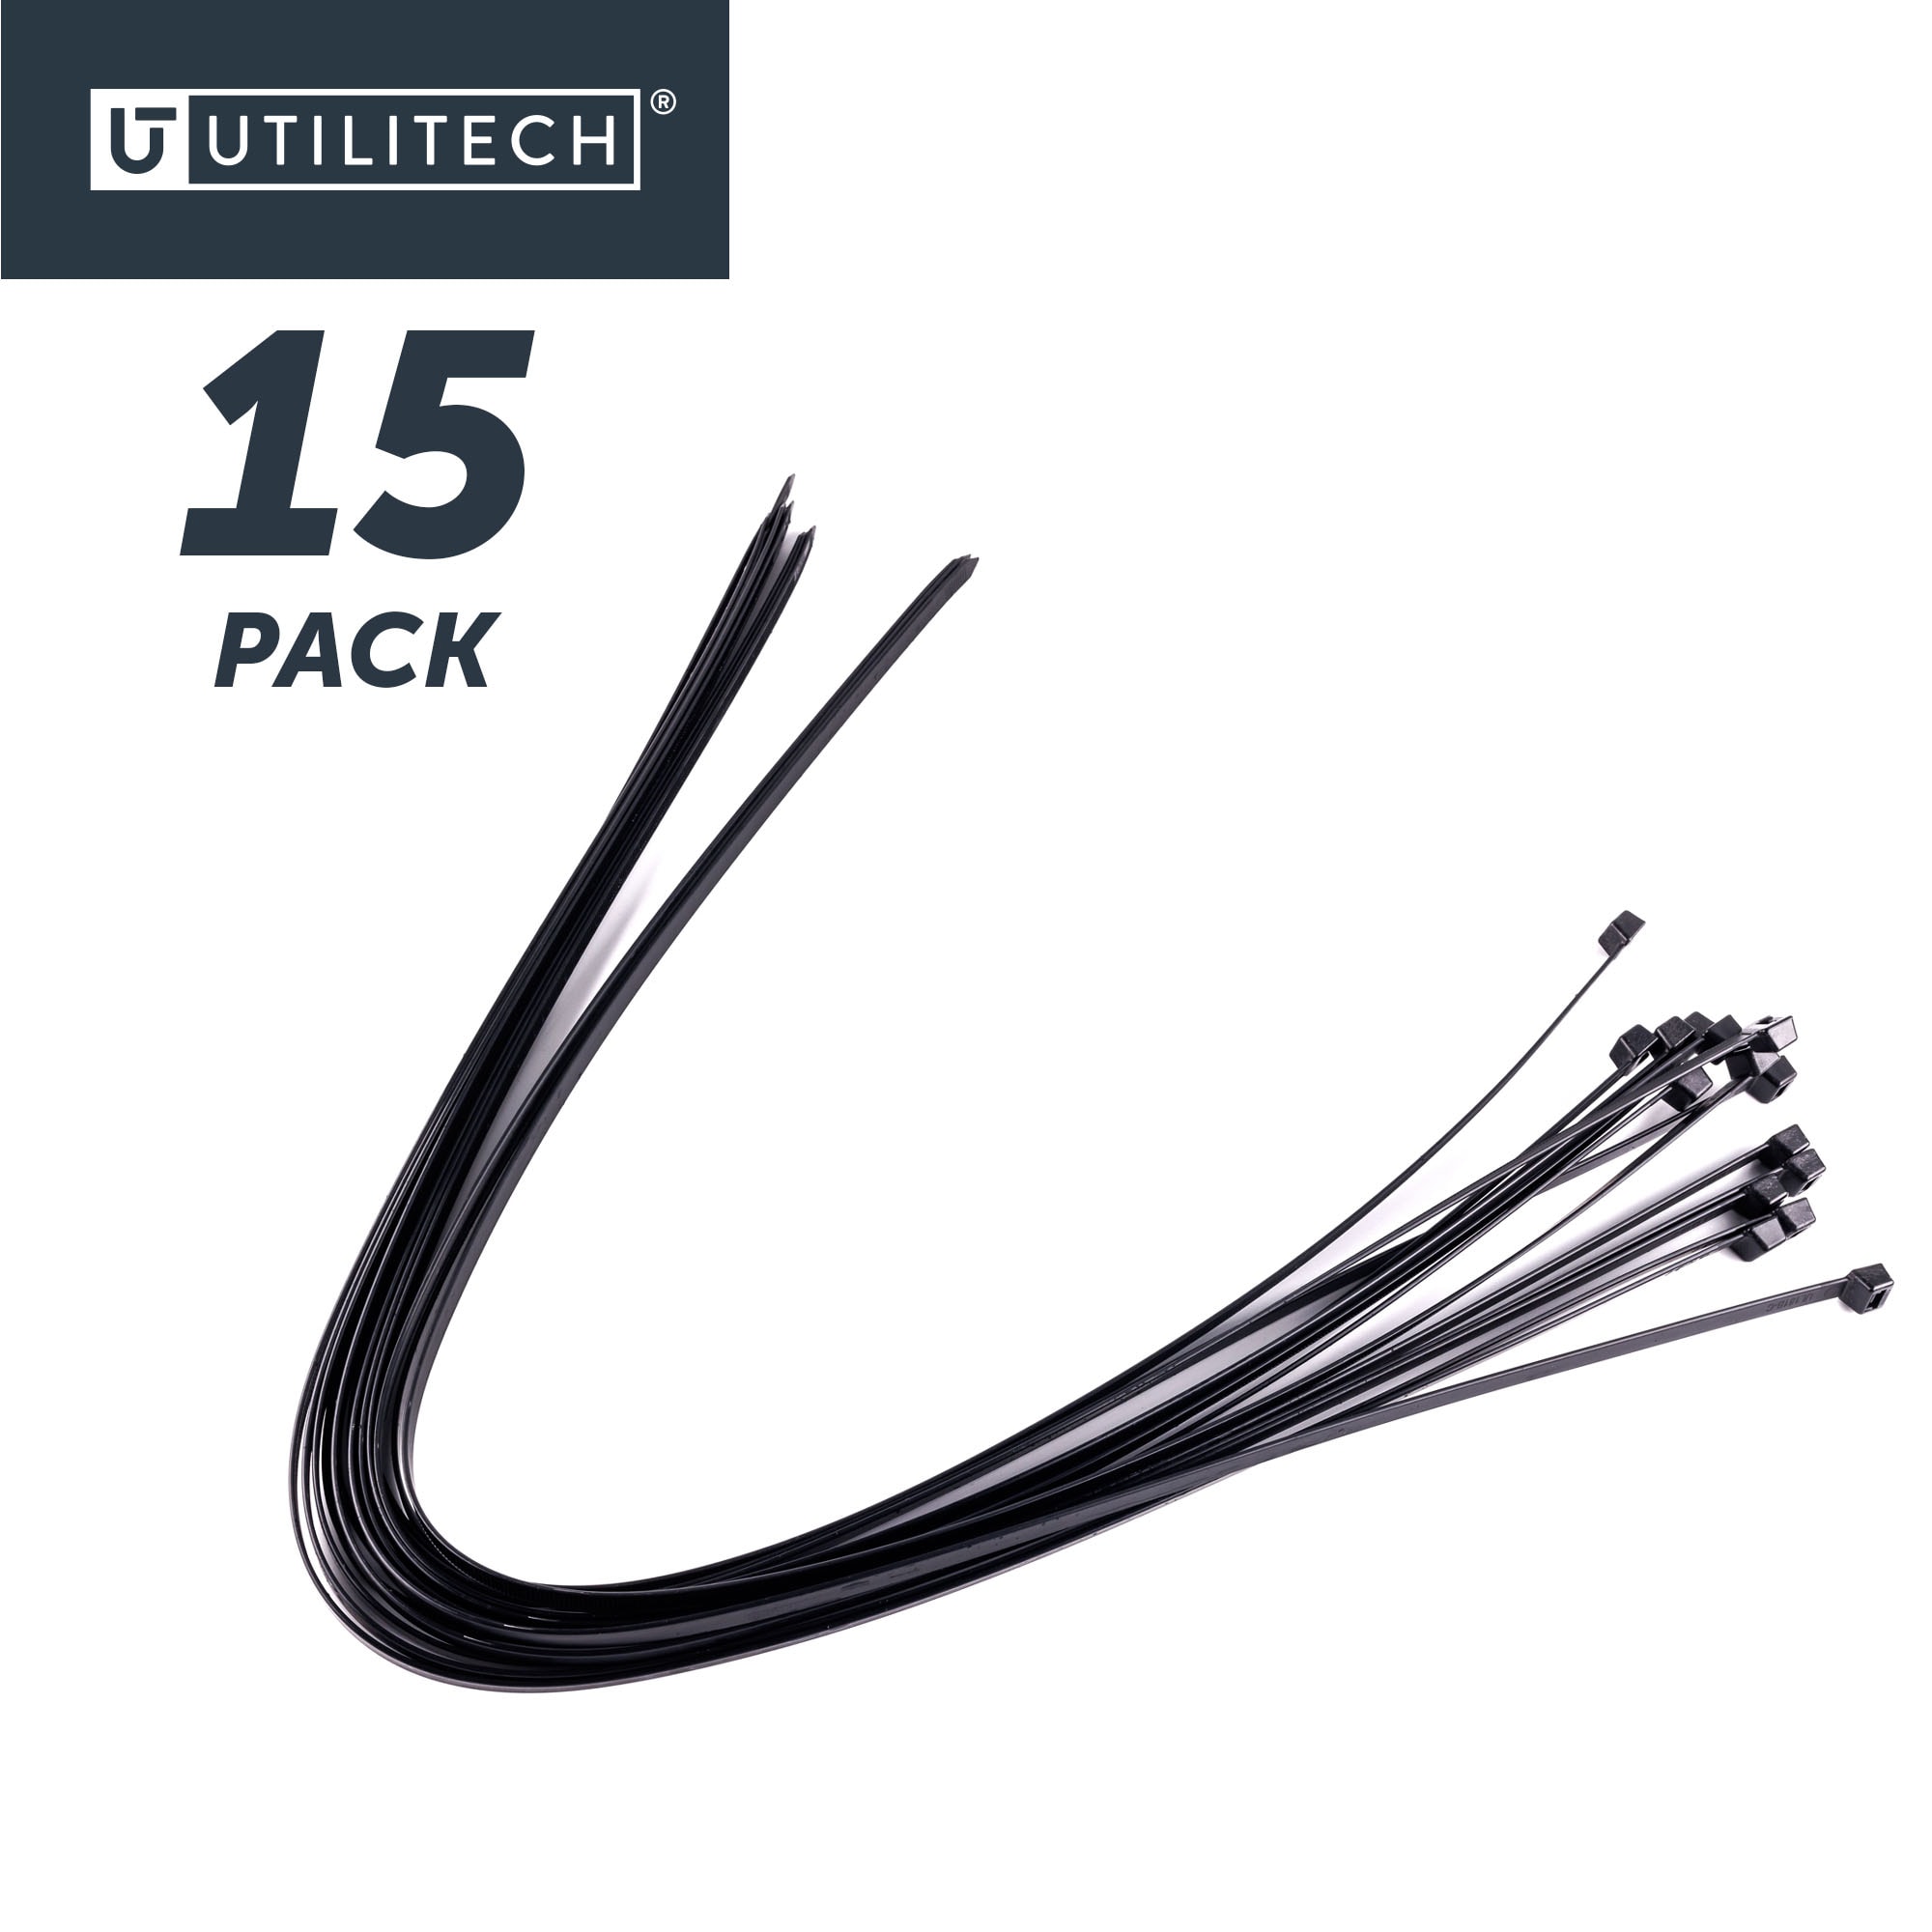 Pedestrian Cable Protector - 36 x 5 x 1, Black - ULINE - H-8490BL